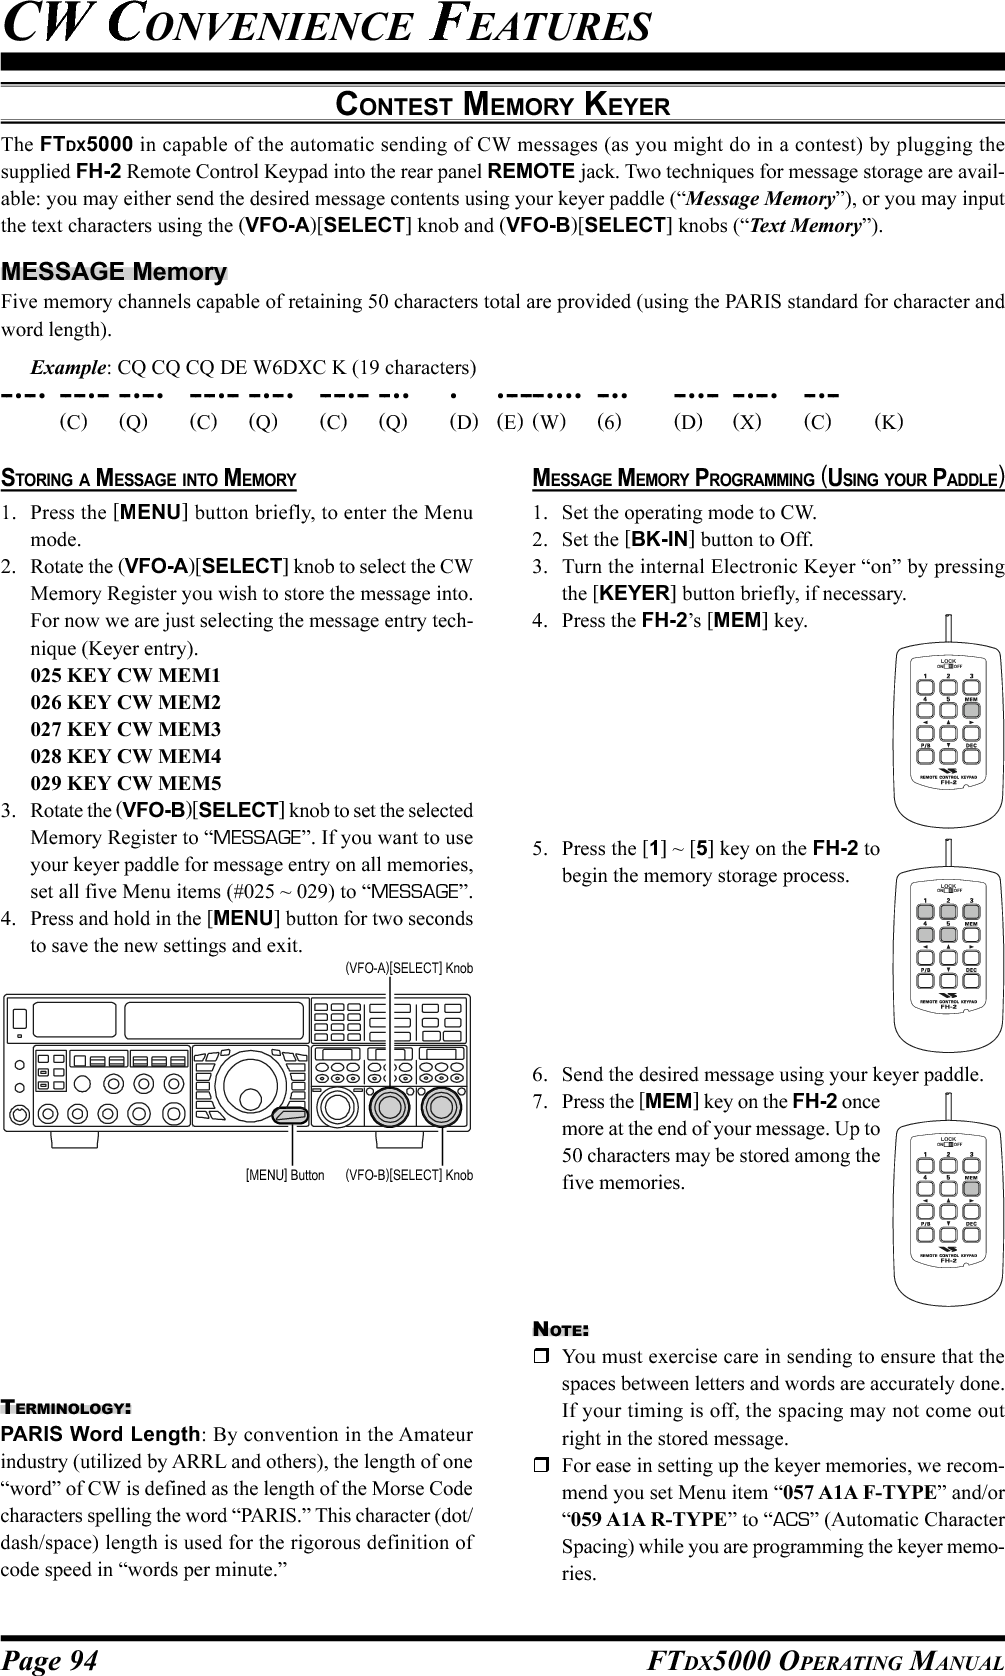 Page 94 FTDX5000 OPERATING MANUALMESSAGE MEMORY PROGRAMMING (USING YOUR PADDLE)1. Set the operating mode to CW.2. Set the [BK-IN] button to Off.3. Turn the internal Electronic Keyer “on” by pressingthe [KEYER] button briefly, if necessary.4. Press the FH-2’s [MEM] key.5. Press the [1] ~ [5] key on the FH-2 tobegin the memory storage process.6. Send the desired message using your keyer paddle.7. Press the [MEM] key on the FH-2 oncemore at the end of your message. Up to50 characters may be stored among thefive memories.CONTEST MEMORY KEYERThe FTDX5000 in capable of the automatic sending of CW messages (as you might do in a contest) by plugging thesupplied FH-2 Remote Control Keypad into the rear panel REMOTE jack. Two techniques for message storage are avail-able: you may either send the desired message contents using your keyer paddle (“Message Memory”), or you may inputthe text characters using the (VFO-A)[SELECT] knob and (VFO-B)[SELECT] knobs (“Text Memory”).MESSAGE MemoryFive memory channels capable of retaining 50 characters total are provided (using the PARIS standard for character andword length).Example: CQ CQ CQ DE W6DXC K (19 characters)-- •-- •-- -- •-- -- •-- •-- -- •-- -- •-- •-- -- •-- -- •• • •-- -- -- •••• -- •• -- ••-- -- •-- •-- •--(C)(Q)(C)(Q)(C)(Q)(D)(E)(W)(6)(D)(X)(C)(K)CW CONVENIENCE FEATURESSTORING A MESSAGE INTO MEMORY1. Press the [MENU] button briefly, to enter the Menumode.2. Rotate the (VFO-A)[SELECT] knob to select the CWMemory Register you wish to store the message into.For now we are just selecting the message entry tech-nique (Keyer entry).025 KEY CW MEM1026 KEY CW MEM2027 KEY CW MEM3028 KEY CW MEM4029 KEY CW MEM53. Rotate the (VFO-B)[SELECT] knob to set the selectedMemory Register to “MESSAGE”. If you want to useyour keyer paddle for message entry on all memories,set all five Menu items (#025 ~ 029) to “MESSAGE”.4. Press and hold in the [MENU] button for two secondsto save the new settings and exit.TERMINOLOGY:PARIS Word Length: By convention in the Amateurindustry (utilized by ARRL and others), the length of one“word” of CW is defined as the length of the Morse Codecharacters spelling the word “PARIS.” This character (dot/dash/space) length is used for the rigorous definition ofcode speed in “words per minute.”(VFO-B)[SELECT] Knob[MENU] Button(VFO-A)[SELECT] KnobLOCKOFFONLOCKOFFONLOCKOFFONNOTE:You must exercise care in sending to ensure that thespaces between letters and words are accurately done.If your timing is off, the spacing may not come outright in the stored message.For ease in setting up the keyer memories, we recom-mend you set Menu item “057 A1A F-TYPE” and/or“059 A1A R-TYPE” to “ACS” (Automatic CharacterSpacing) while you are programming the keyer memo-ries.